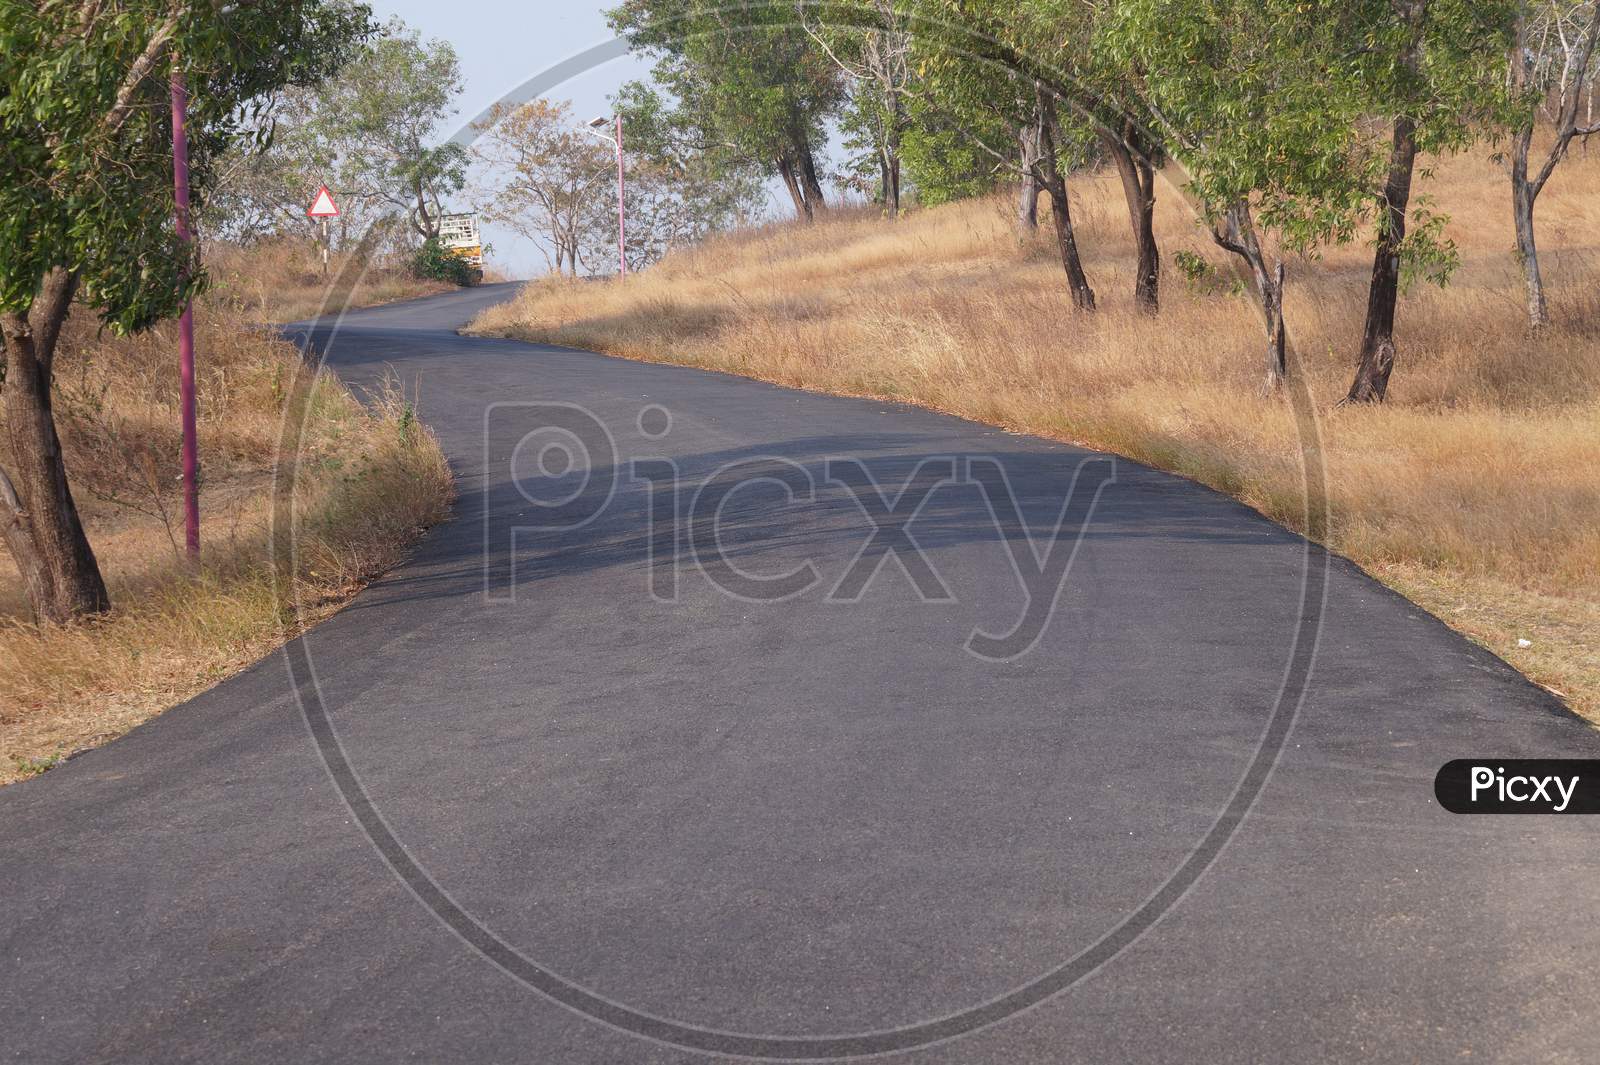 A Rural Road Through The Top Of A Hill